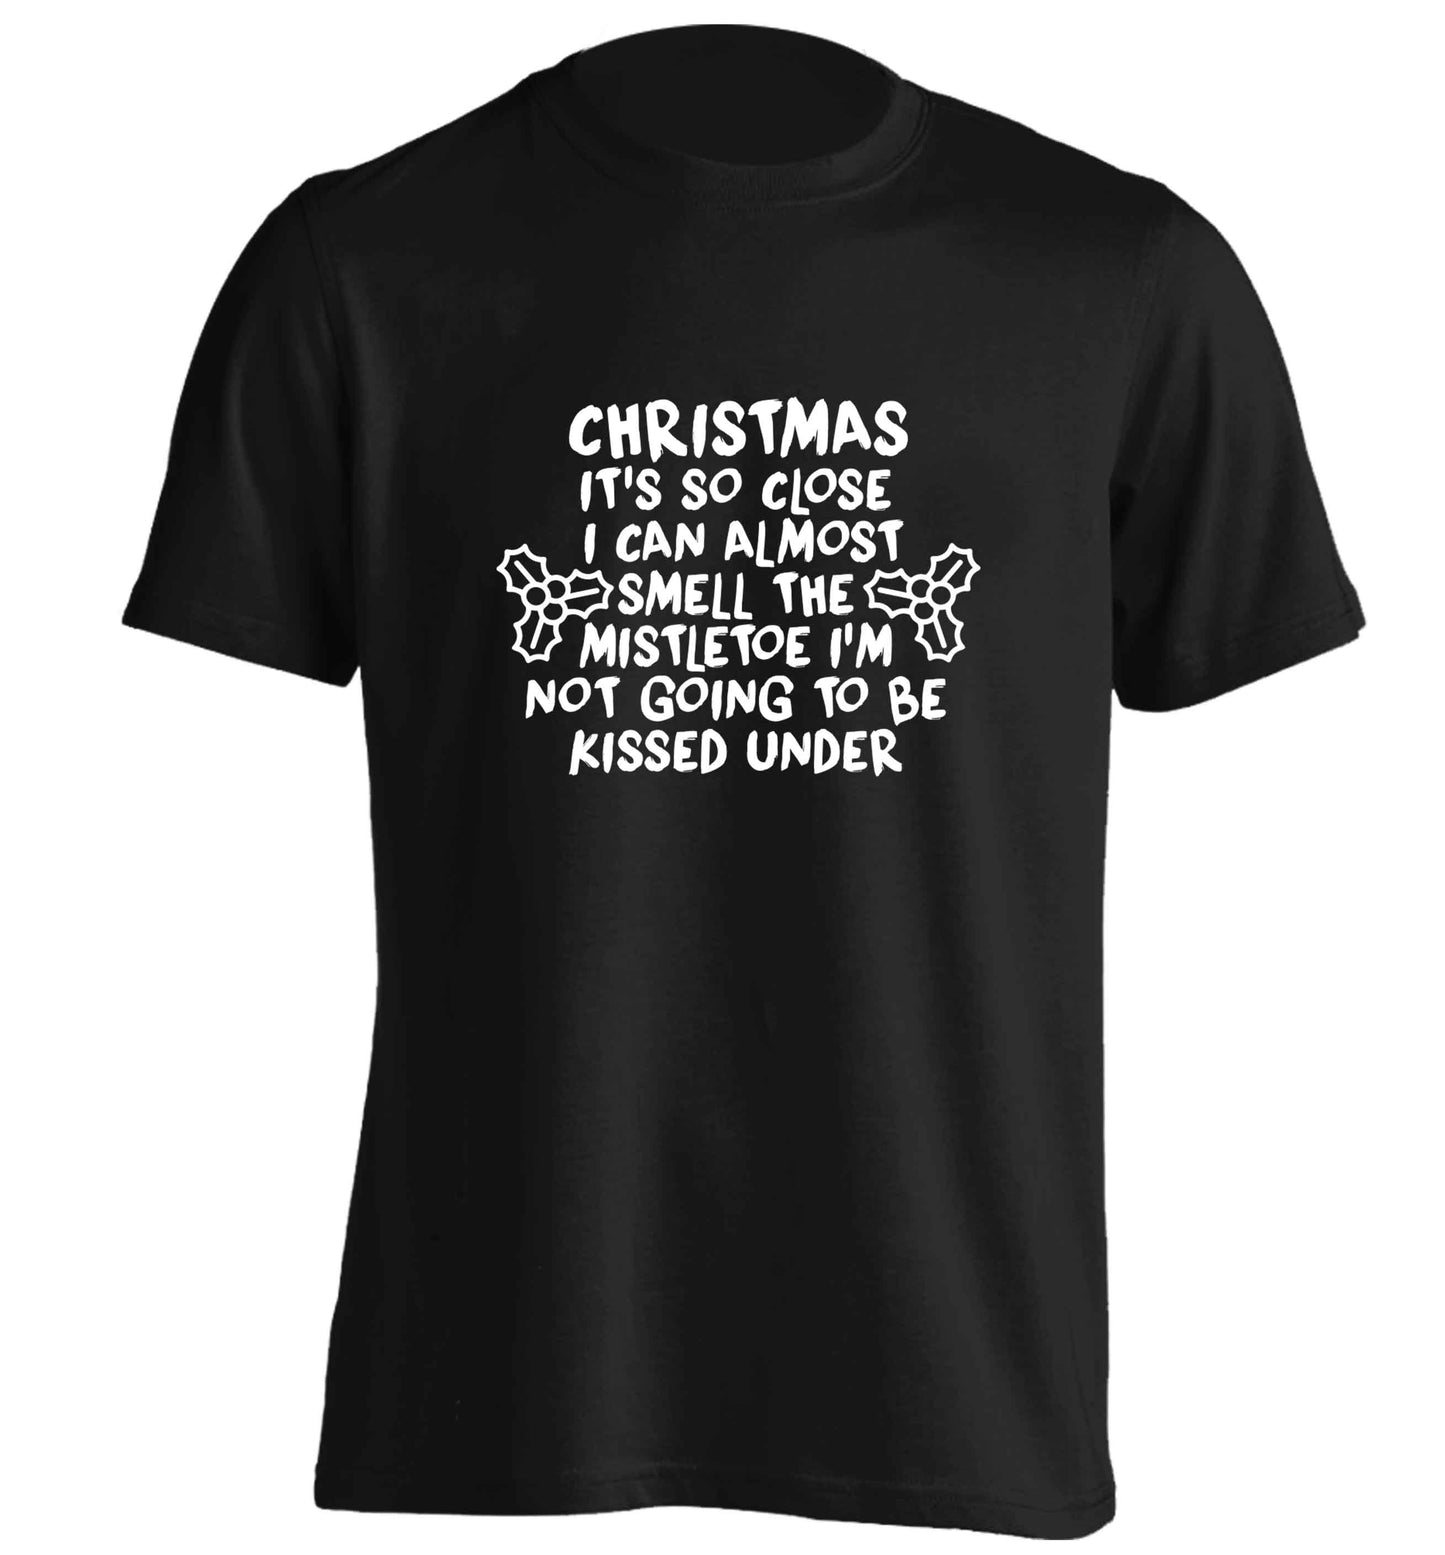 Christmas it's so close I can almost smell the misteltoe I'm not going to be kissed under adults unisex black Tshirt 2XL